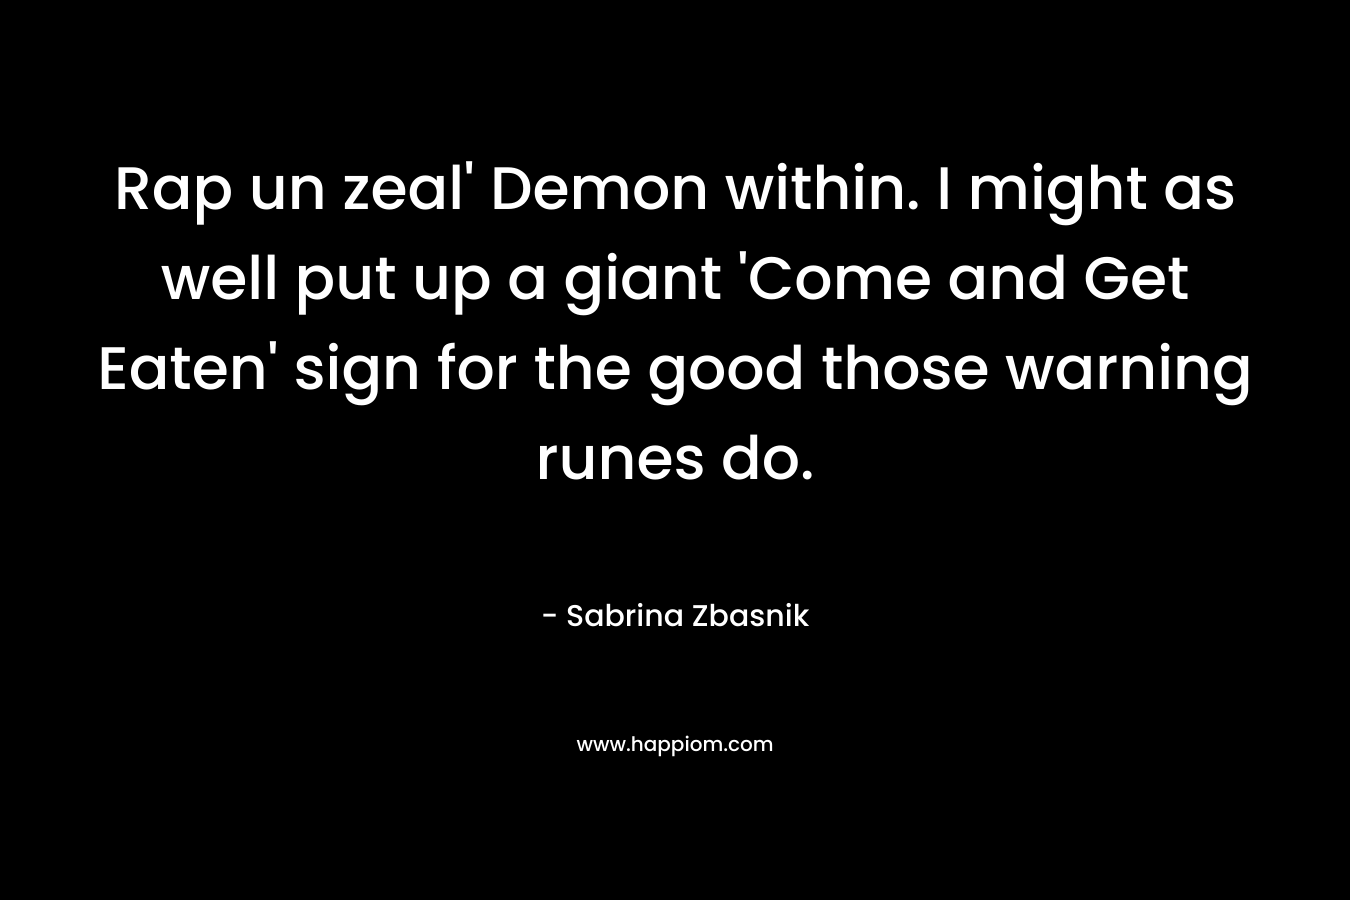 Rap un zeal’ Demon within. I might as well put up a giant ‘Come and Get Eaten’ sign for the good those warning runes do. – Sabrina Zbasnik